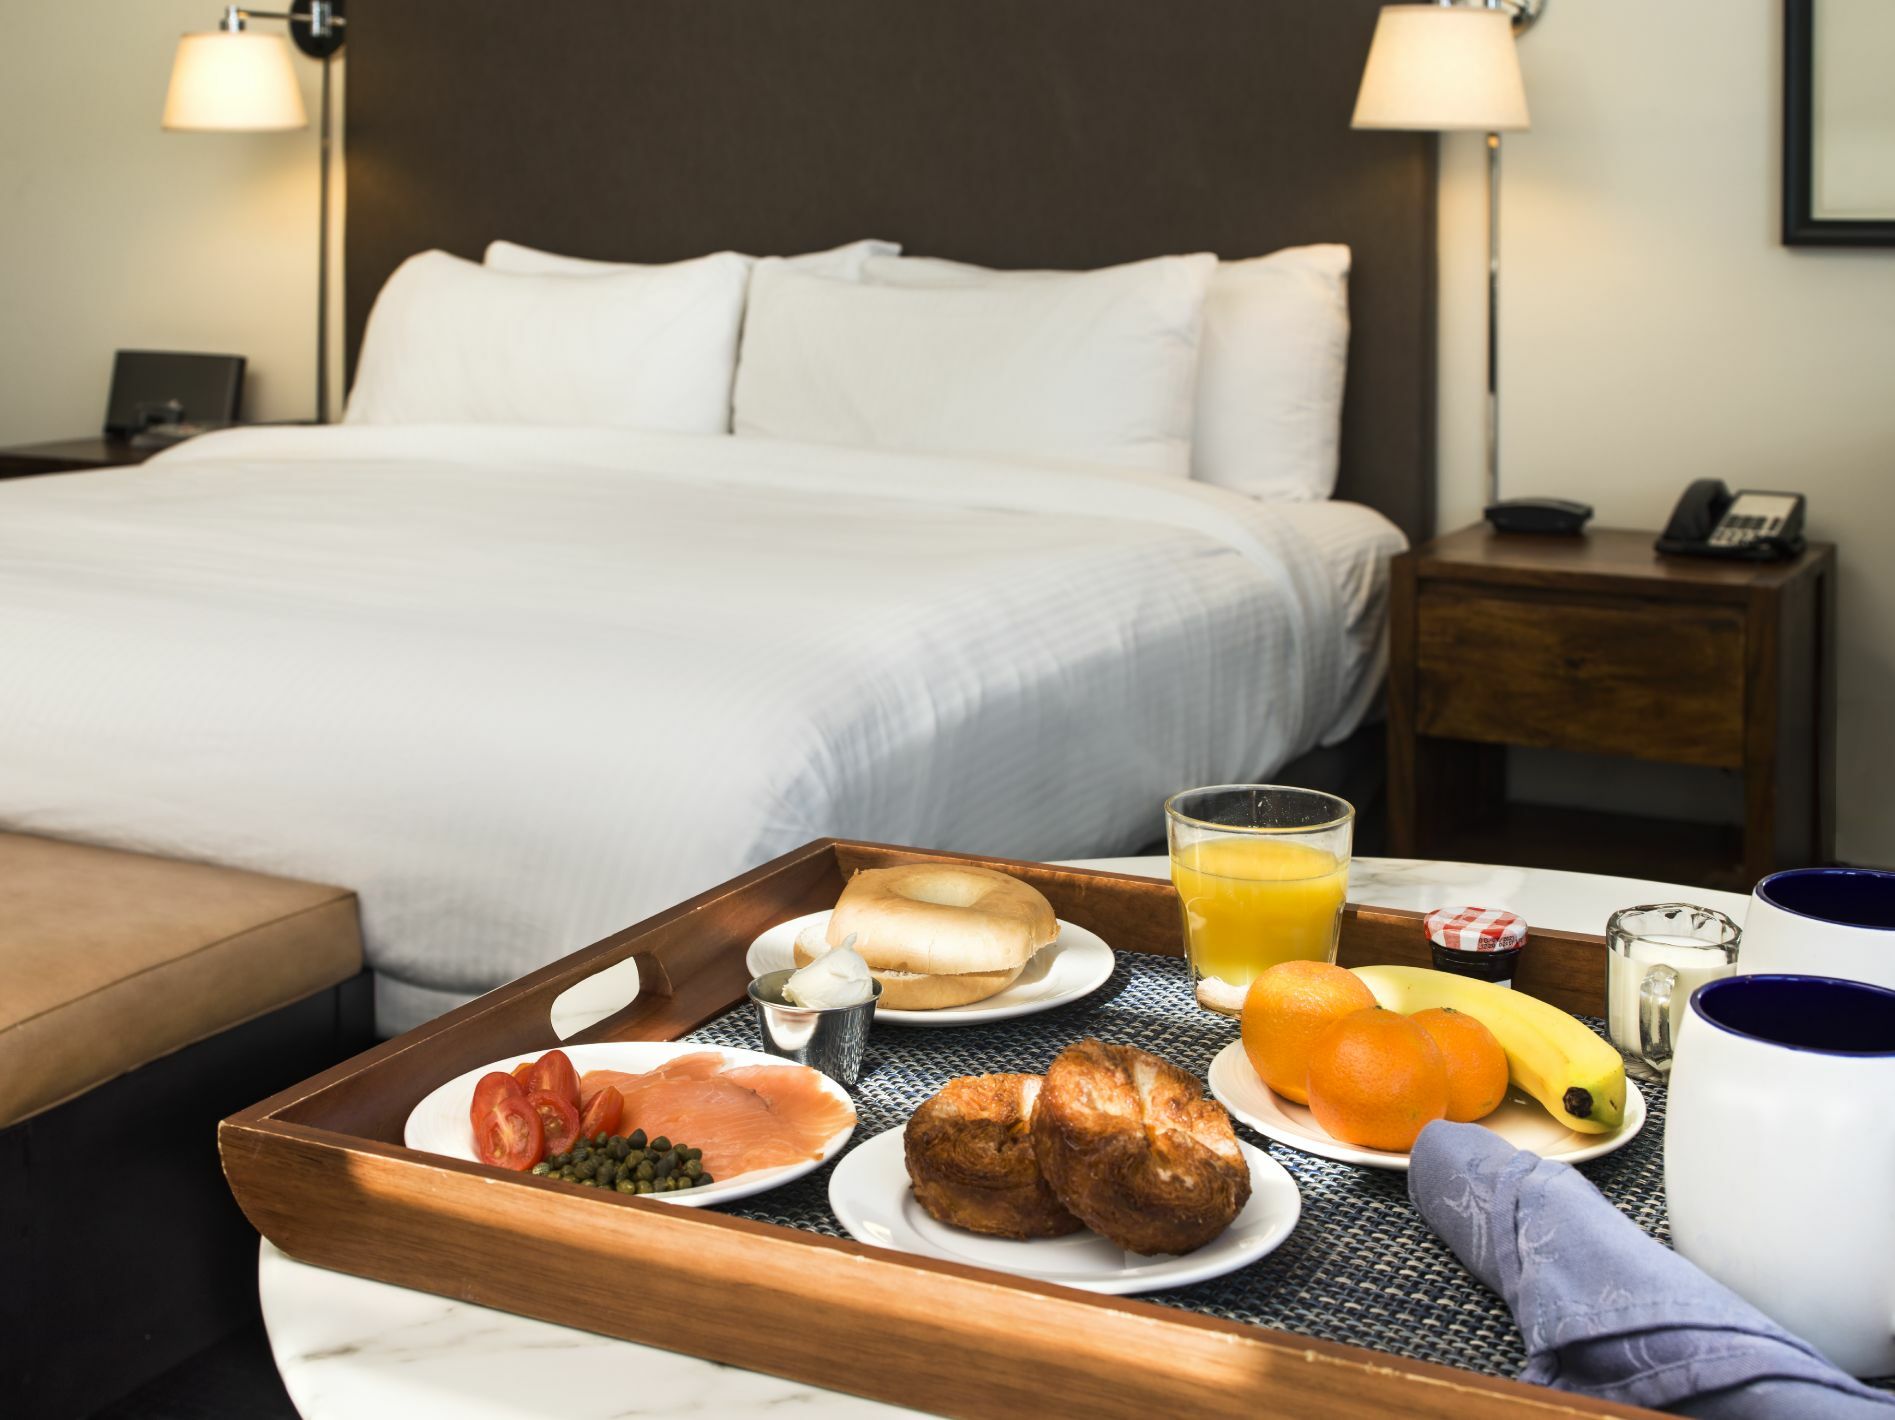 Continental breakfast tray next to the bed with bagel, cream cheese, lox, capers, tomatoes, muffins, fresh fruit, coffee and juice.15-1464.jpg